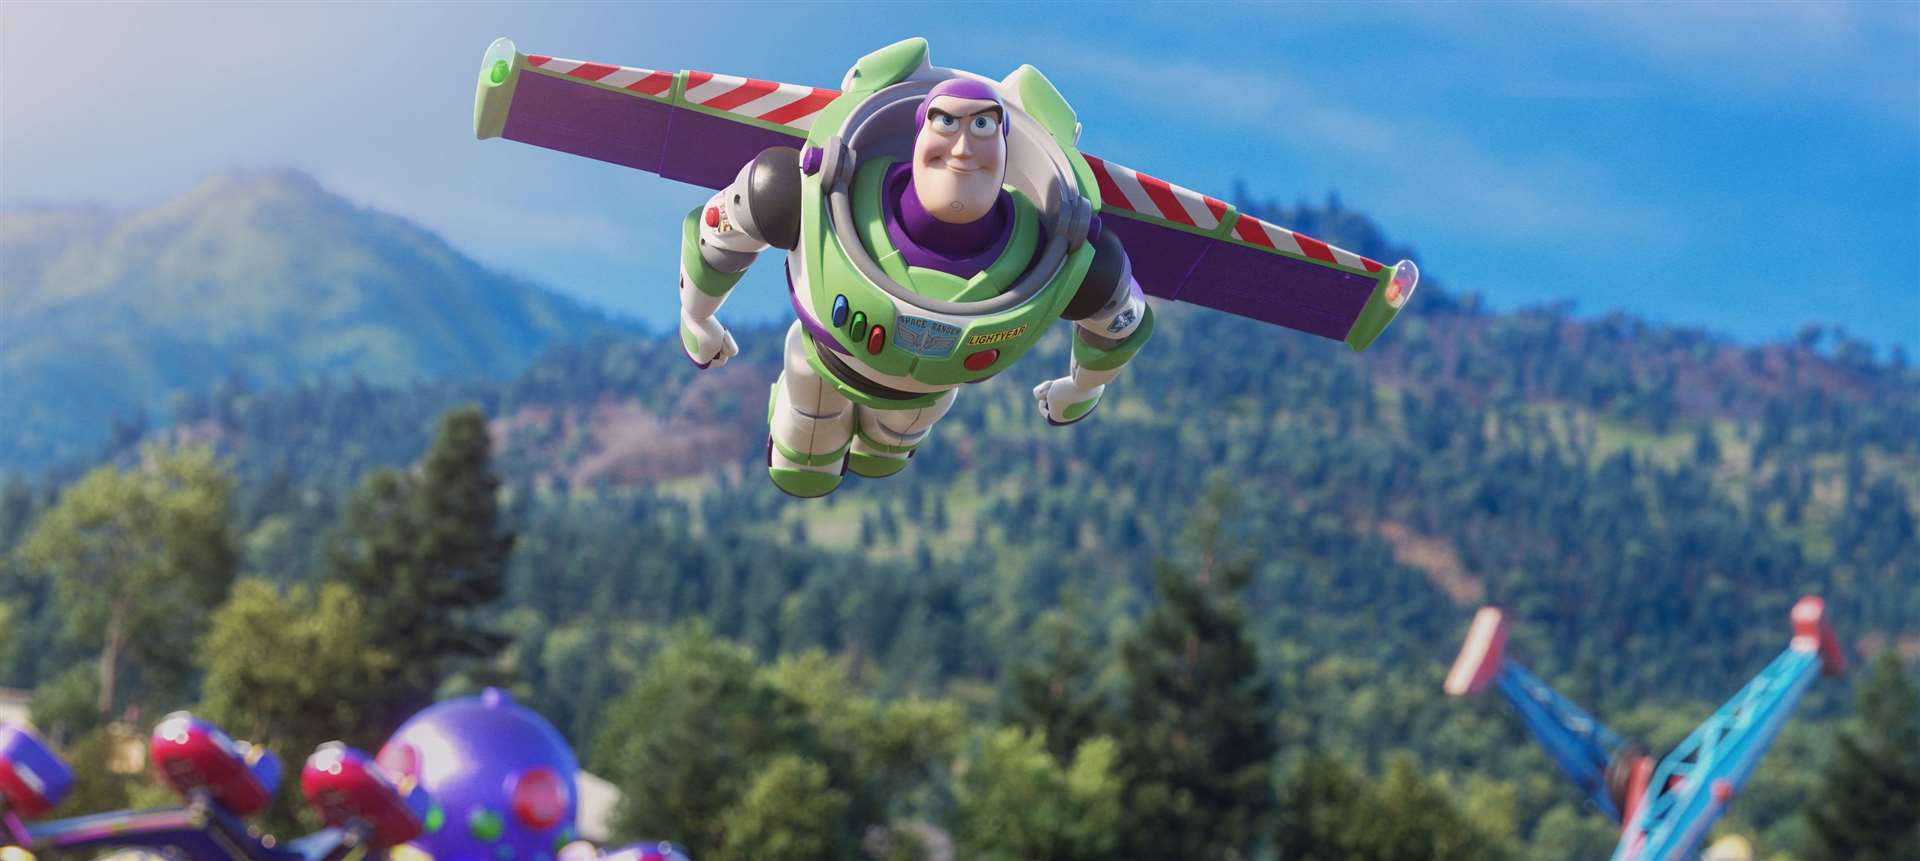 Buzz Lightyear (voiced by Tim Allen) is back in Toy Story 4 Picture: Disney Pixar